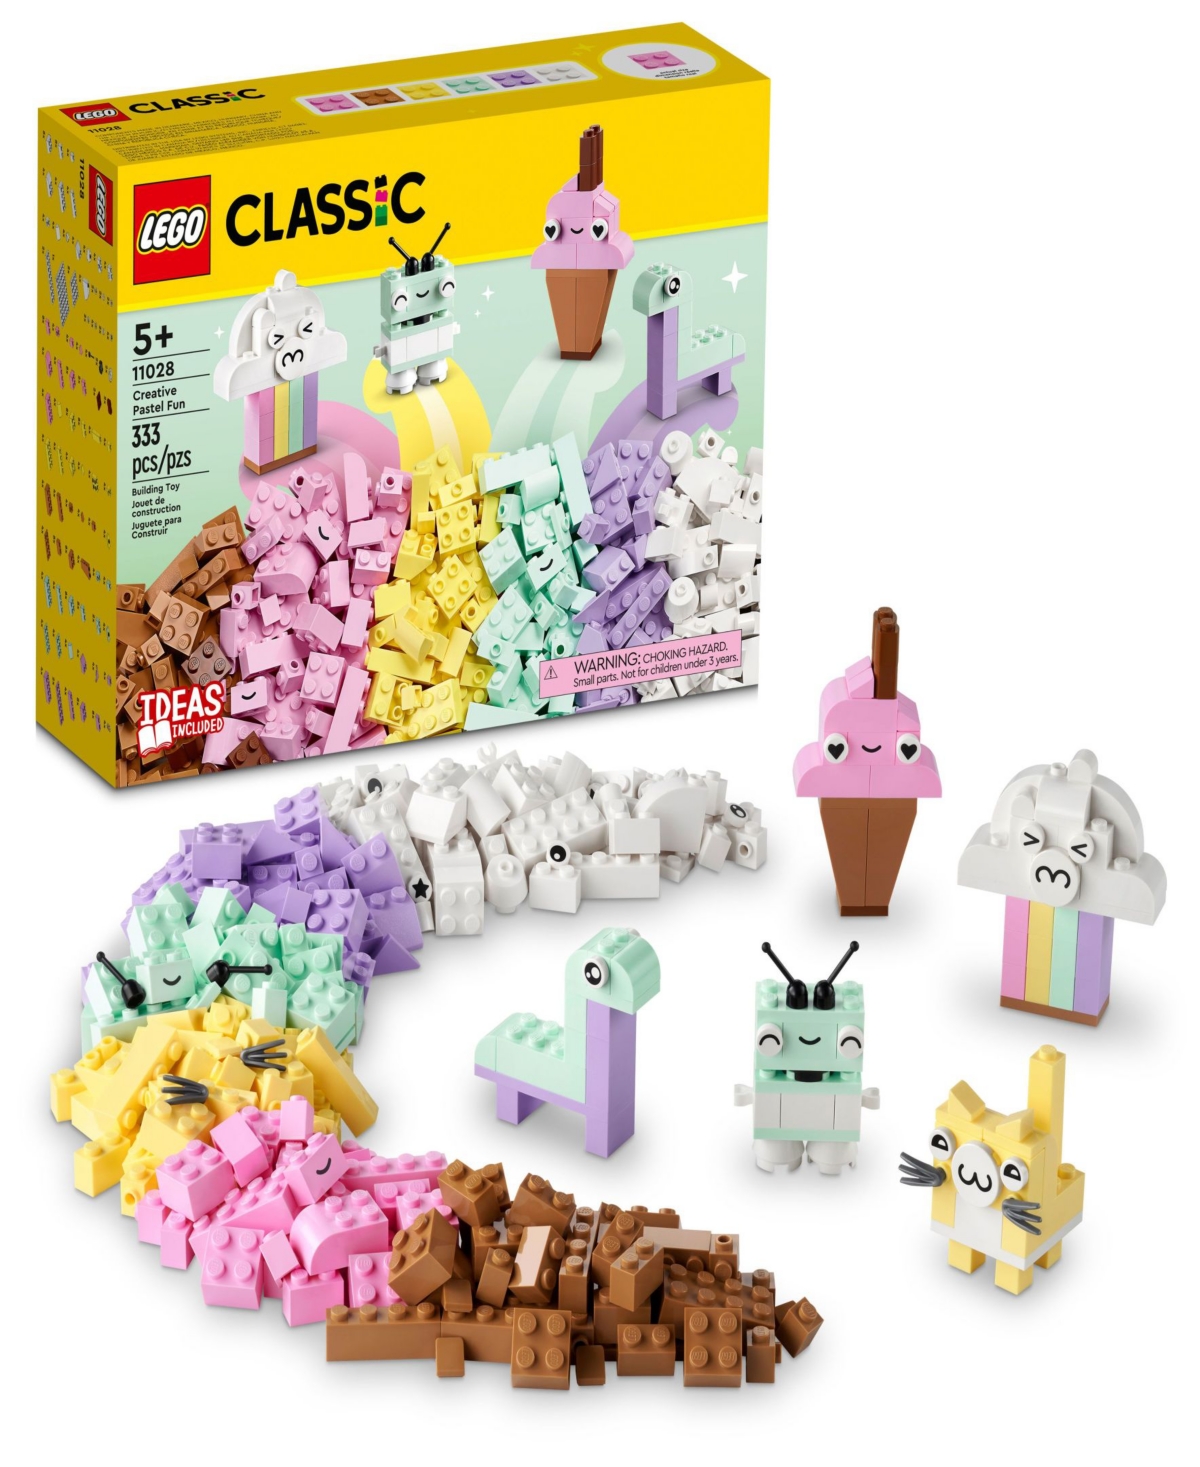 Lego Classic 11028 Creative Pastel Fun Toy Assorted Piece Brick Expansion Building Set In Multicolor